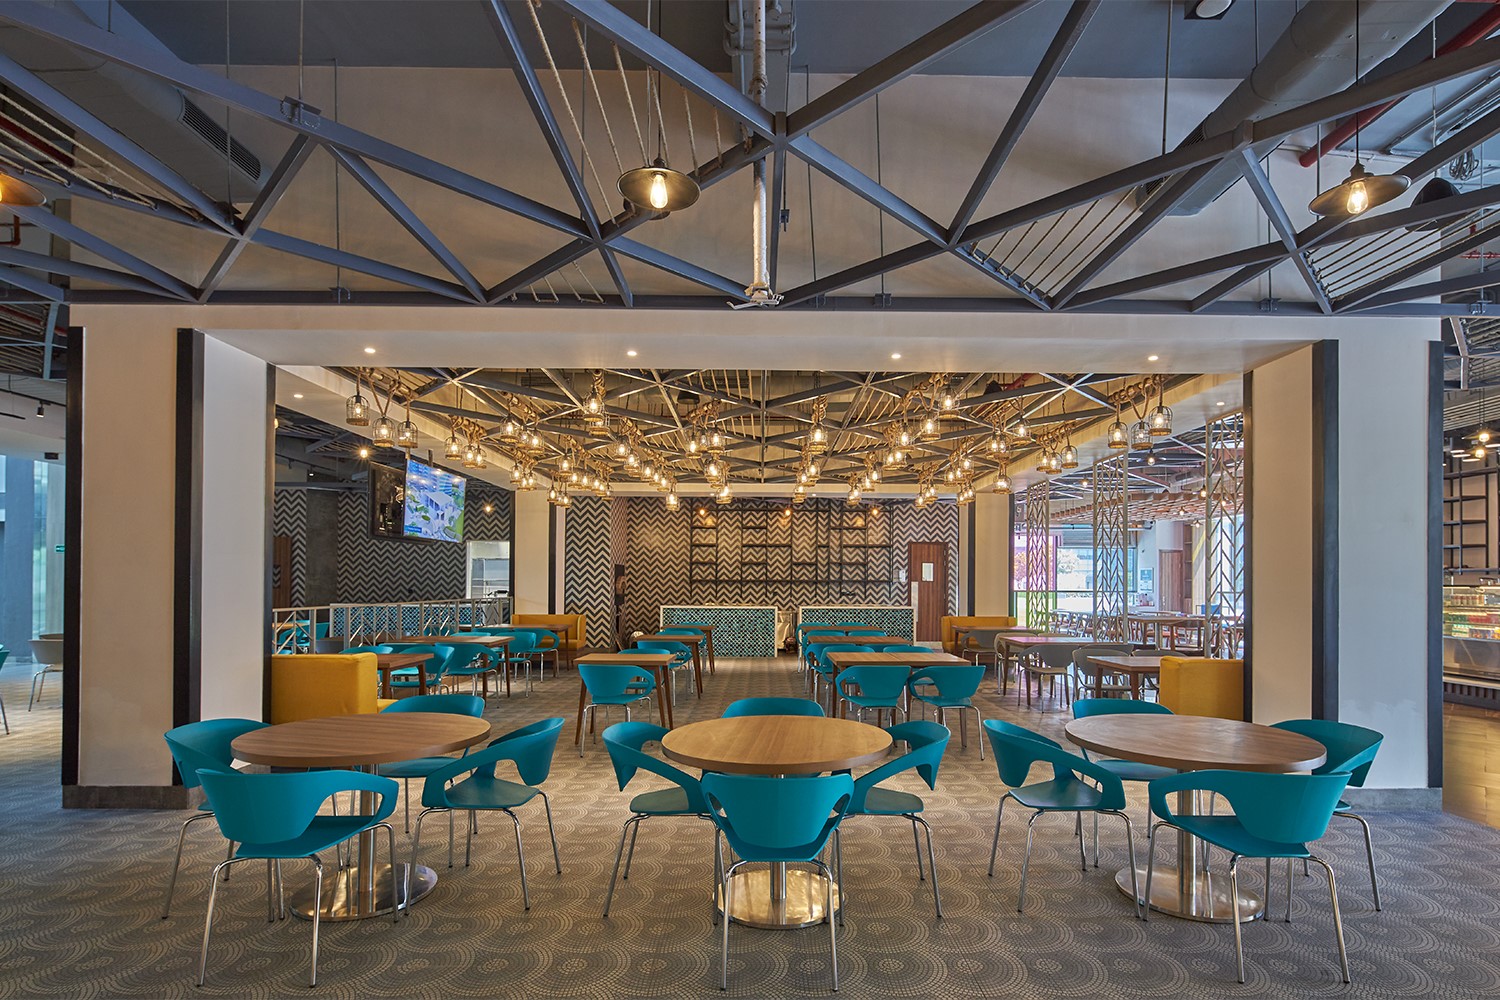 Cafeteria and lounge seating with televisions, wooden tables, and aqua colored chairs